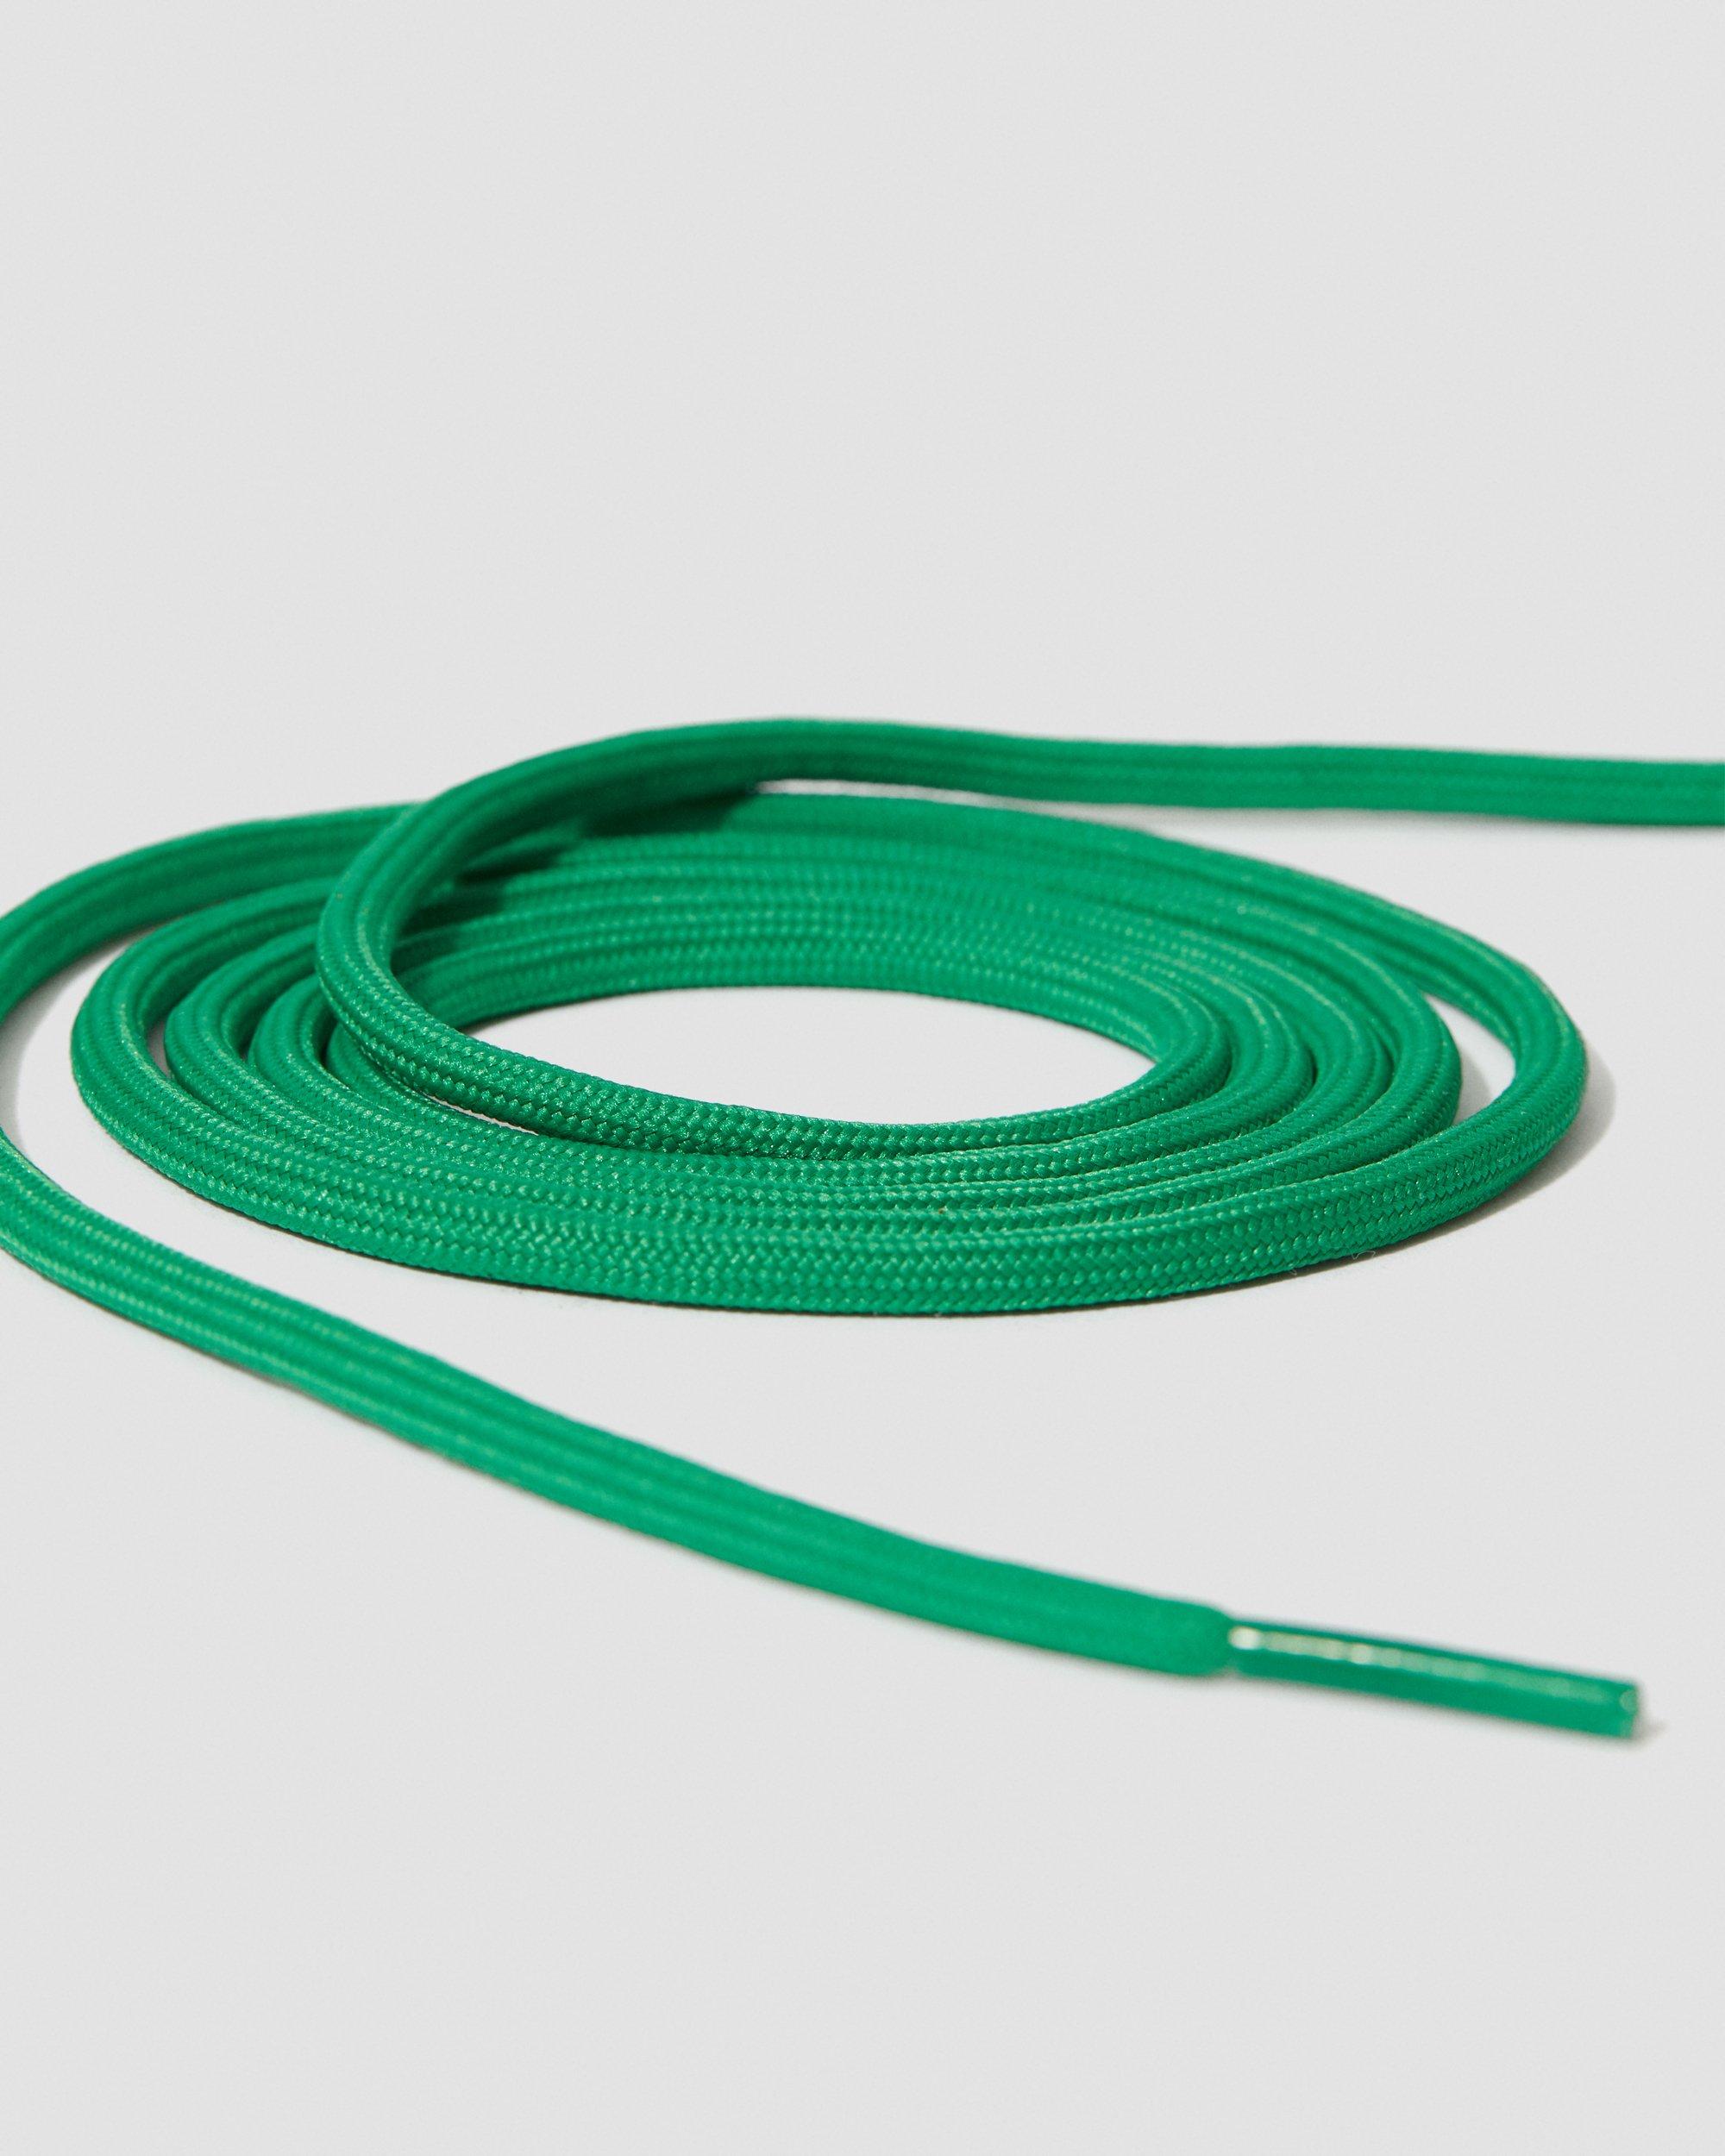 55 Inch Round Shoe Laces (8-10 Eye) in Green